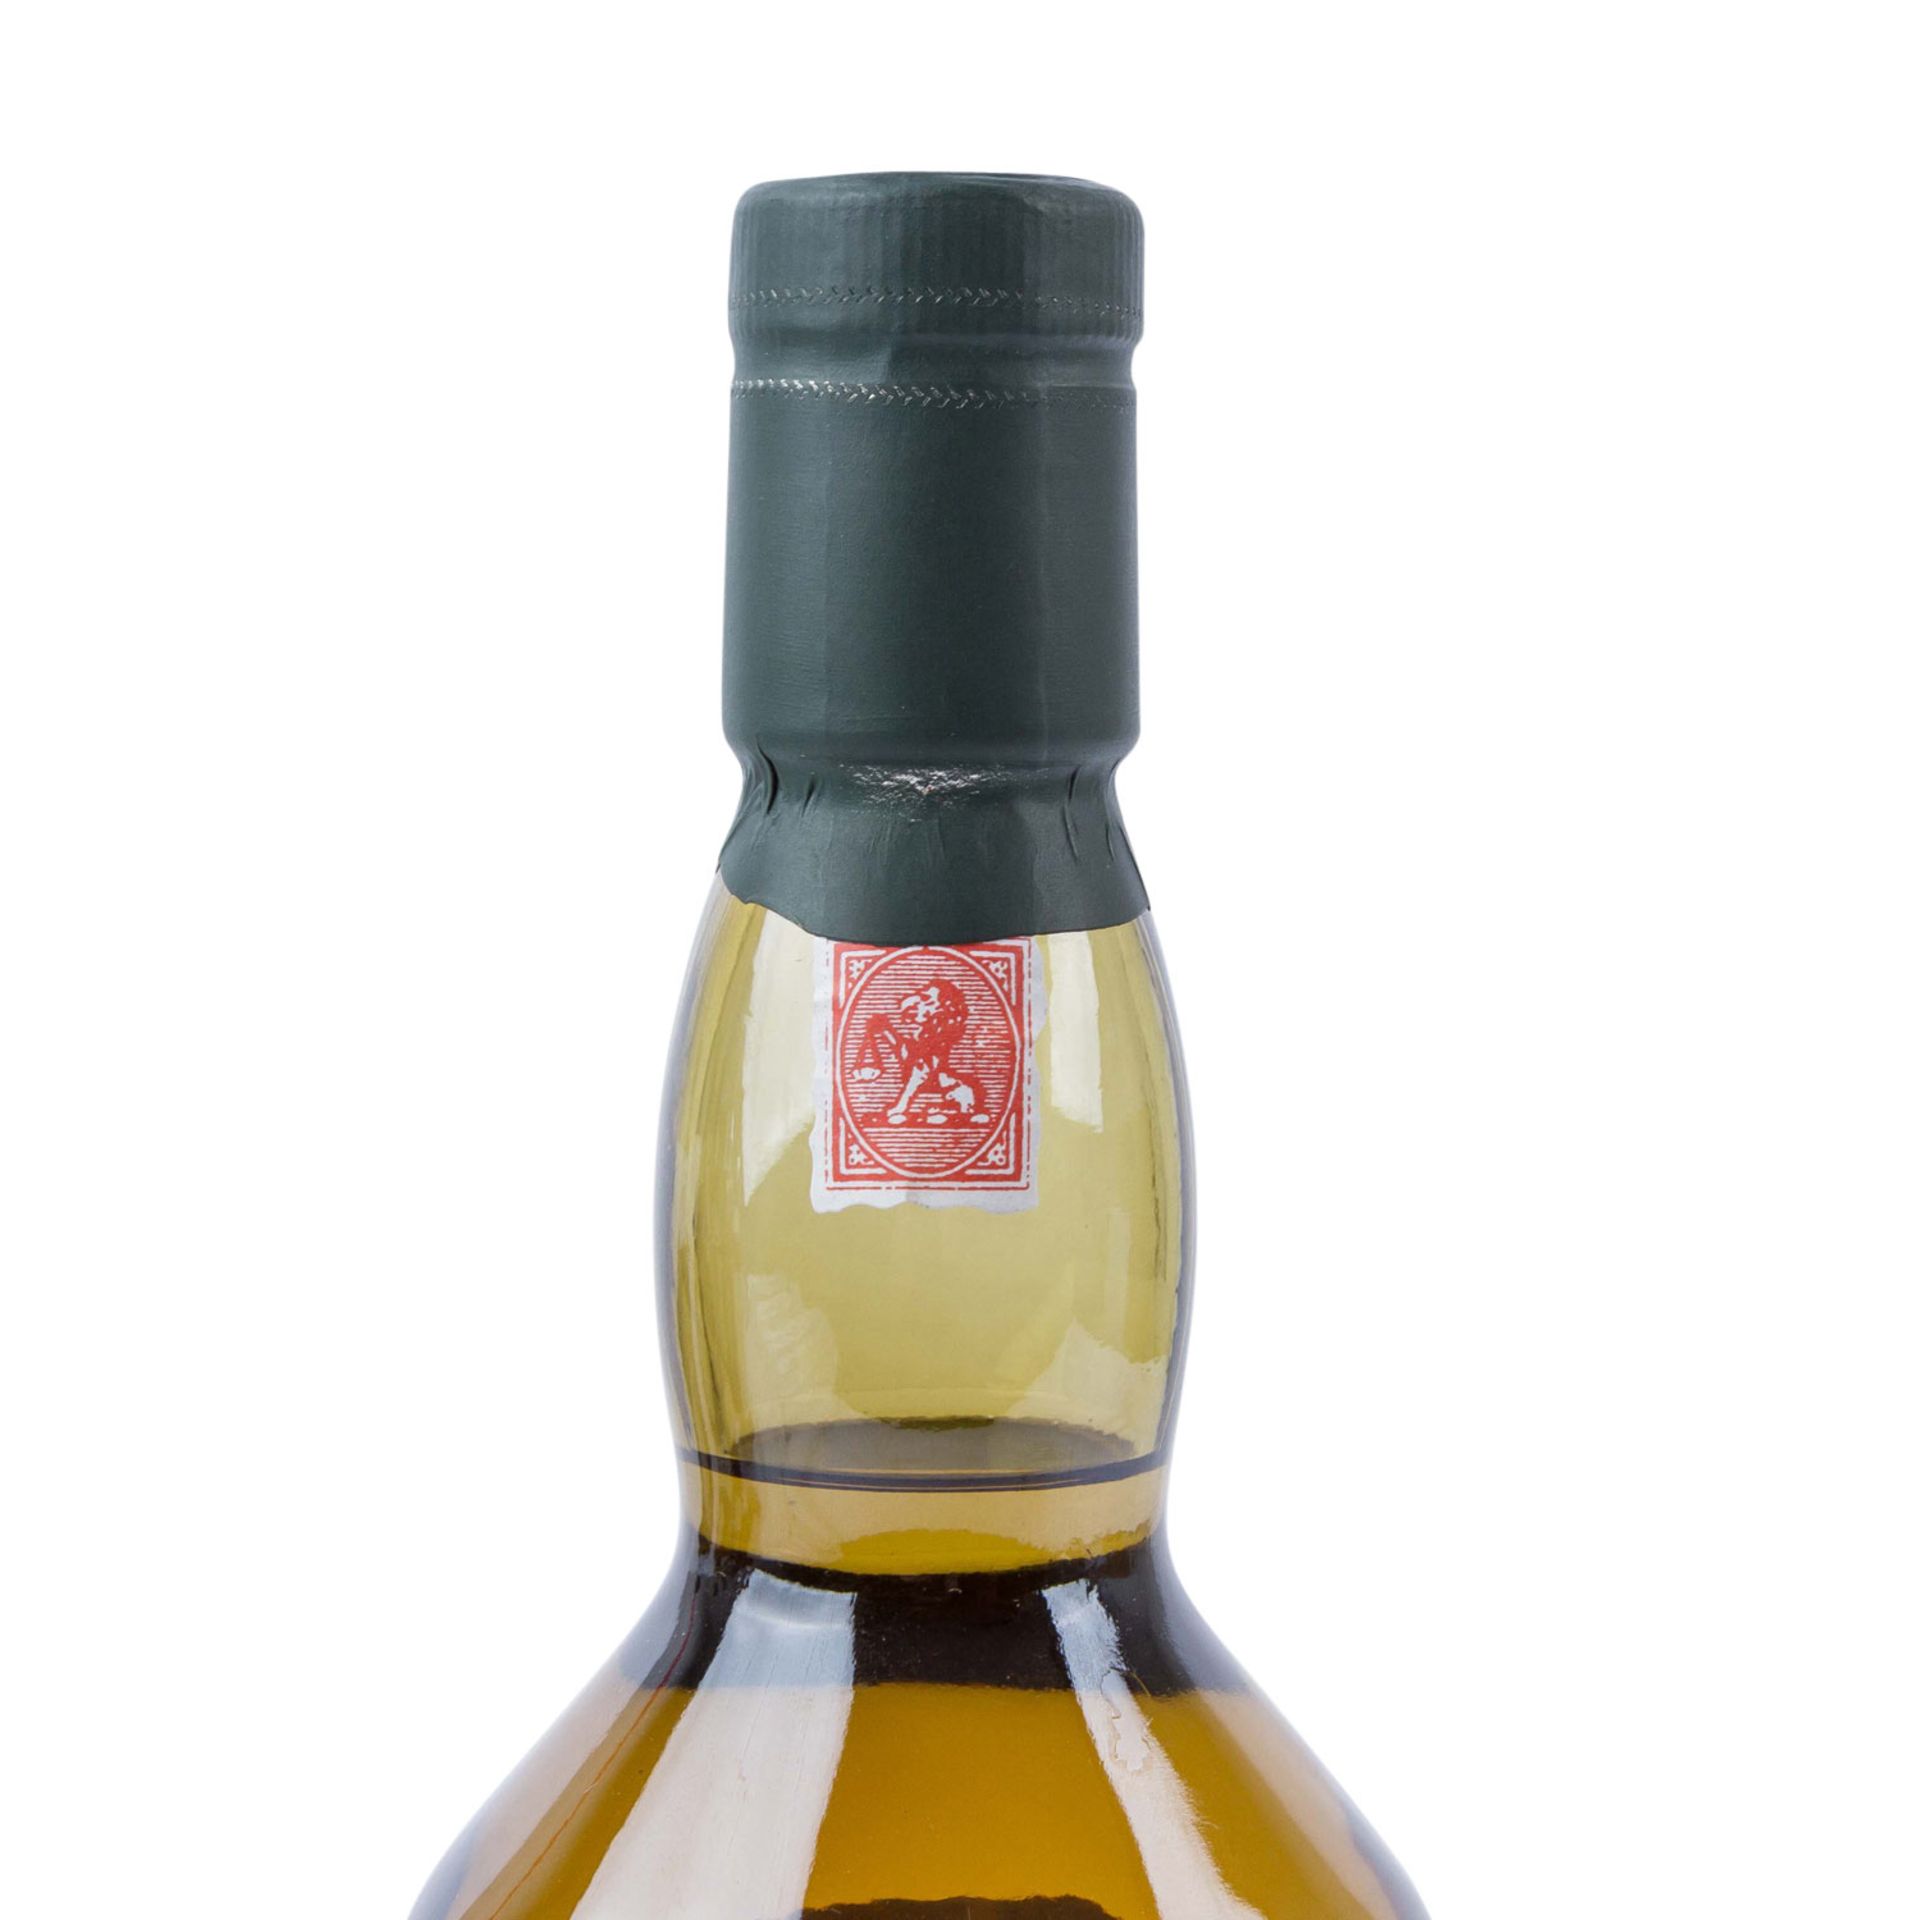 LAGAVULIN SPECIAL RELEASE Islay Single Malt Scotch Whisky 'Aged 12 Years' - Image 3 of 3